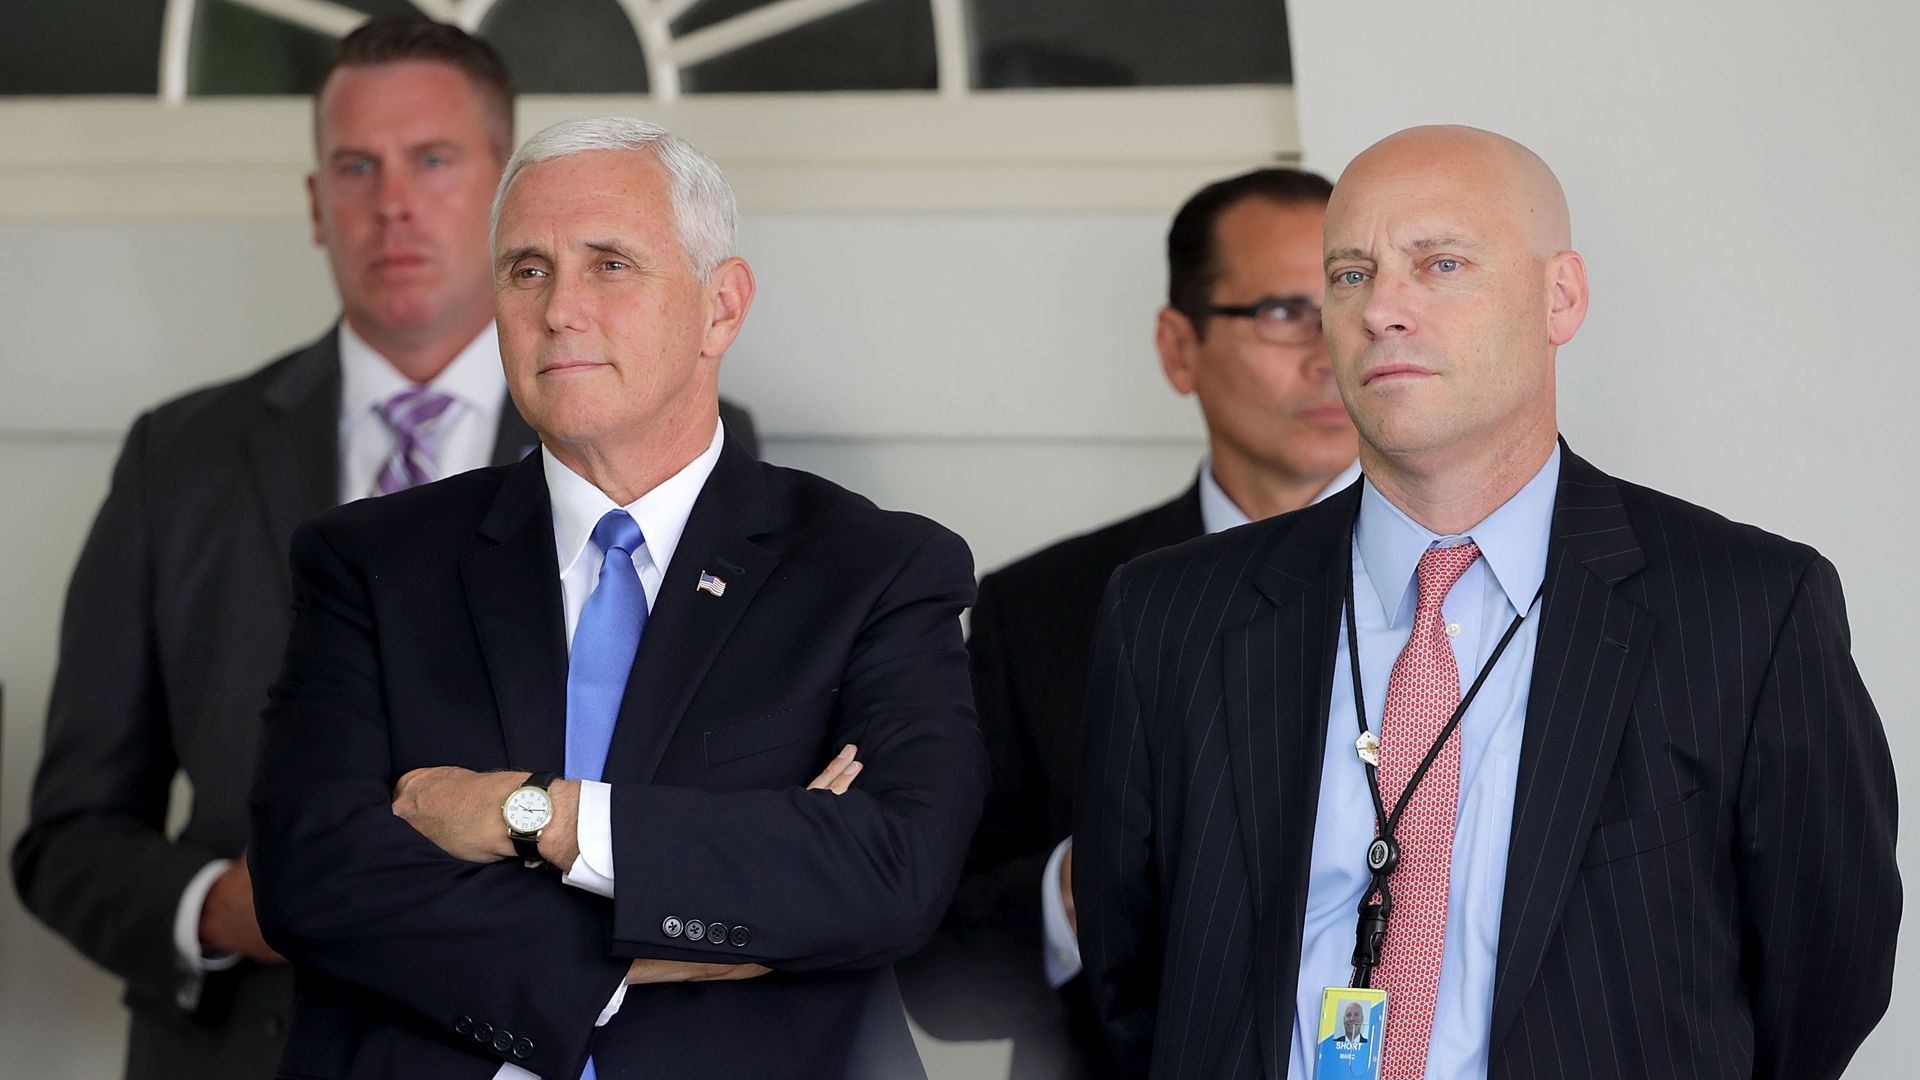 Former Vice President Mike Pence is seen with his chief of staff, Marc Short.